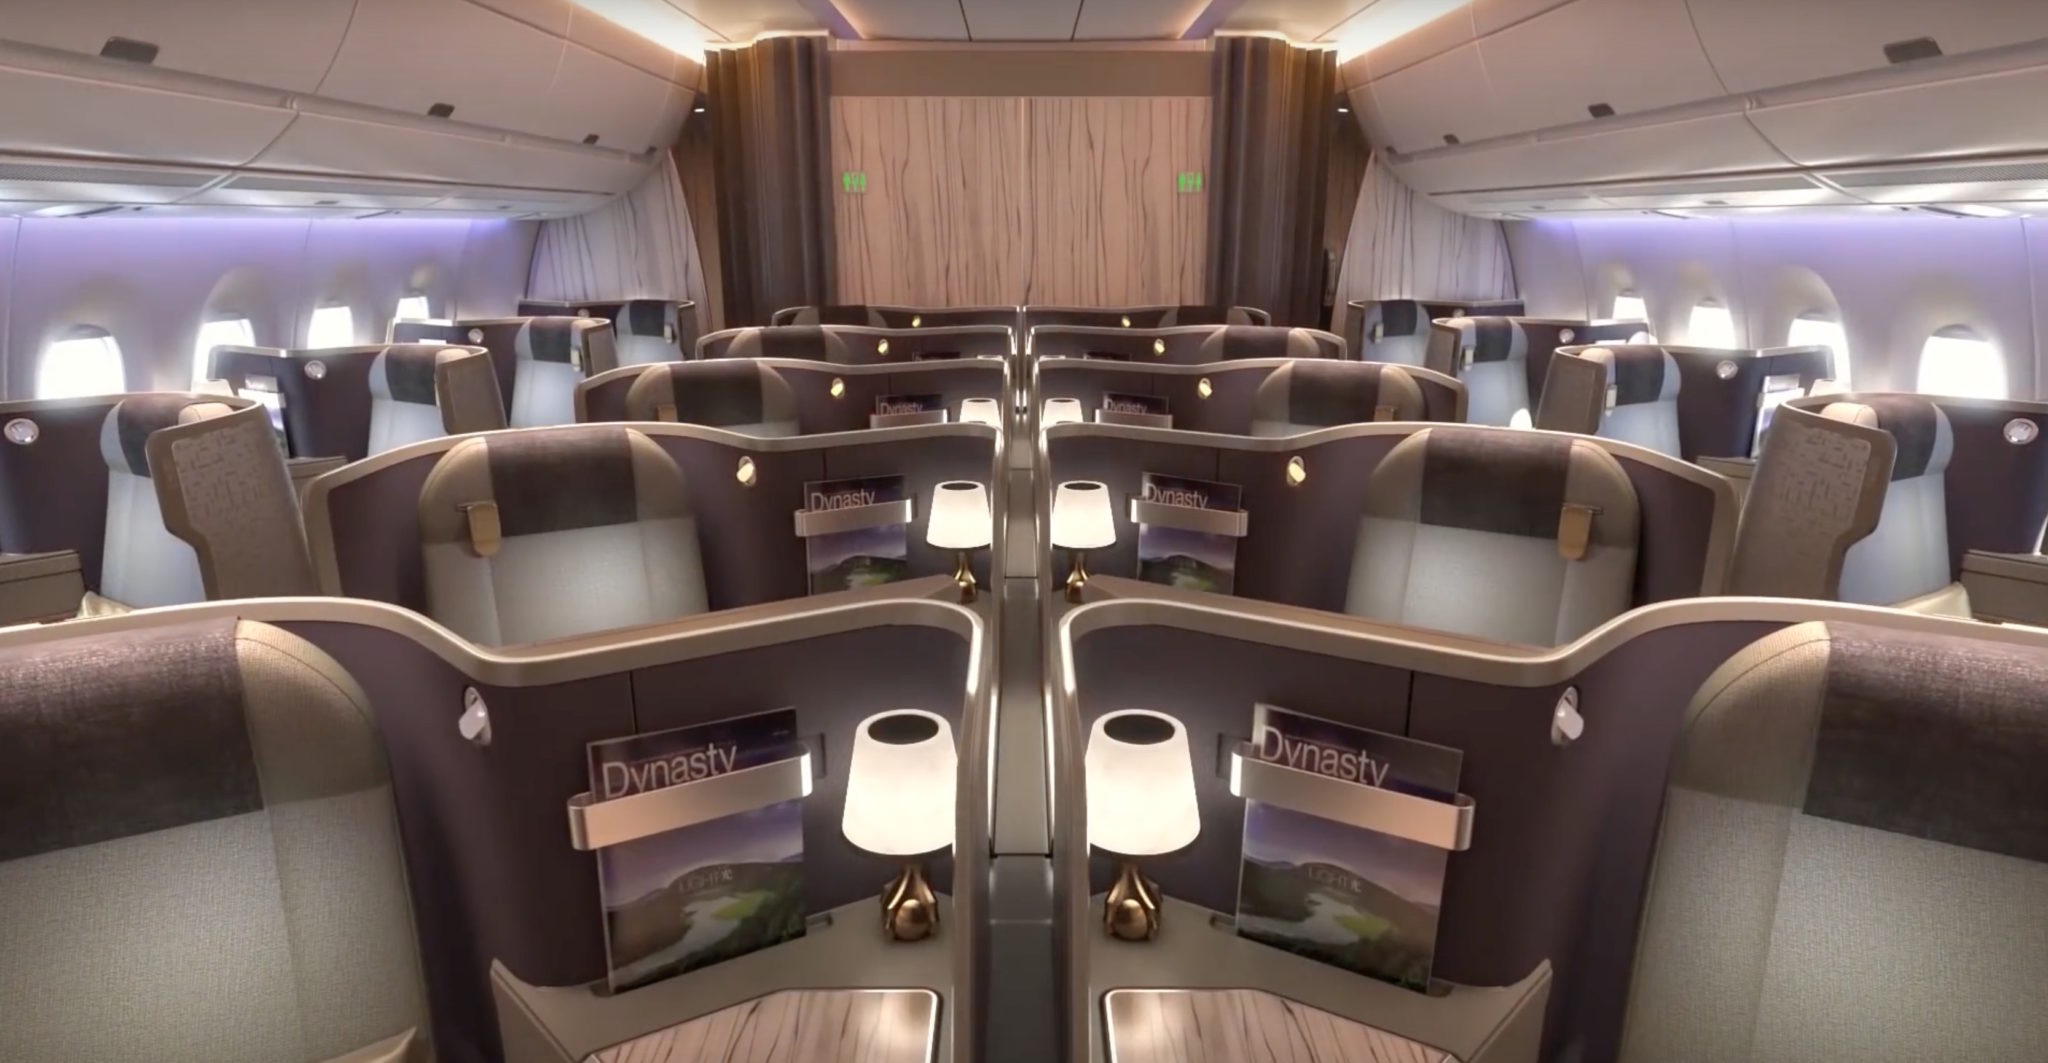 The Low Cost Airlines To Fly Business Class To Europe From Australia